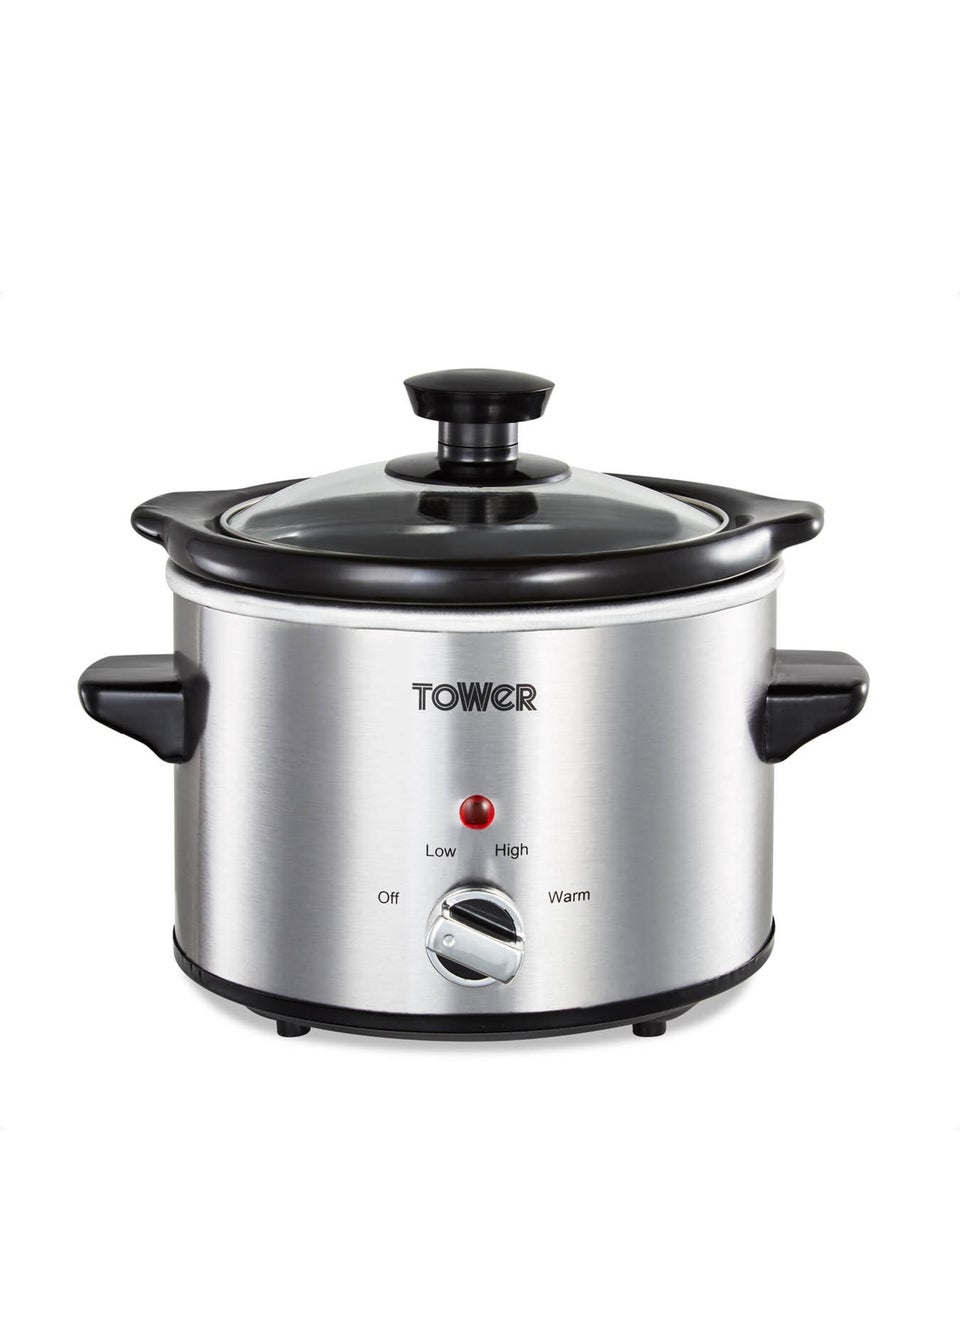 Tower Infinity Stainless Steel Slow Cooker (1.5L)